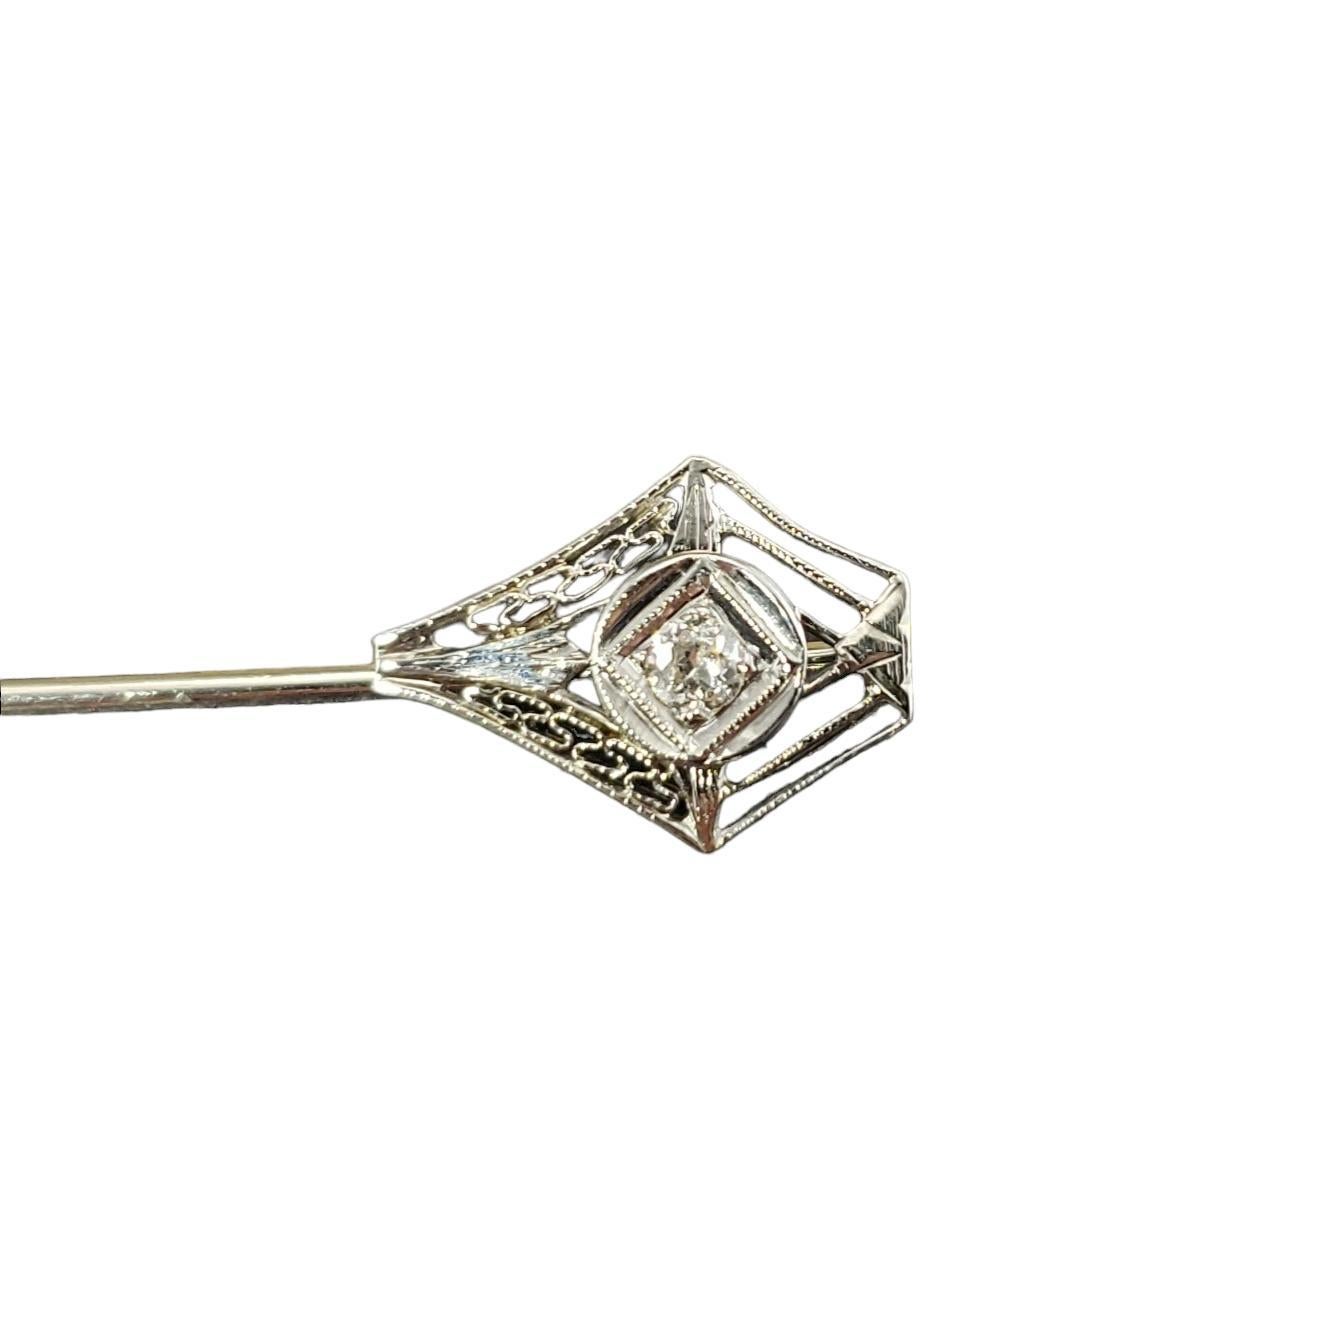 10K White Gold and Diamond Stick Pin #16374 In Good Condition For Sale In Washington Depot, CT